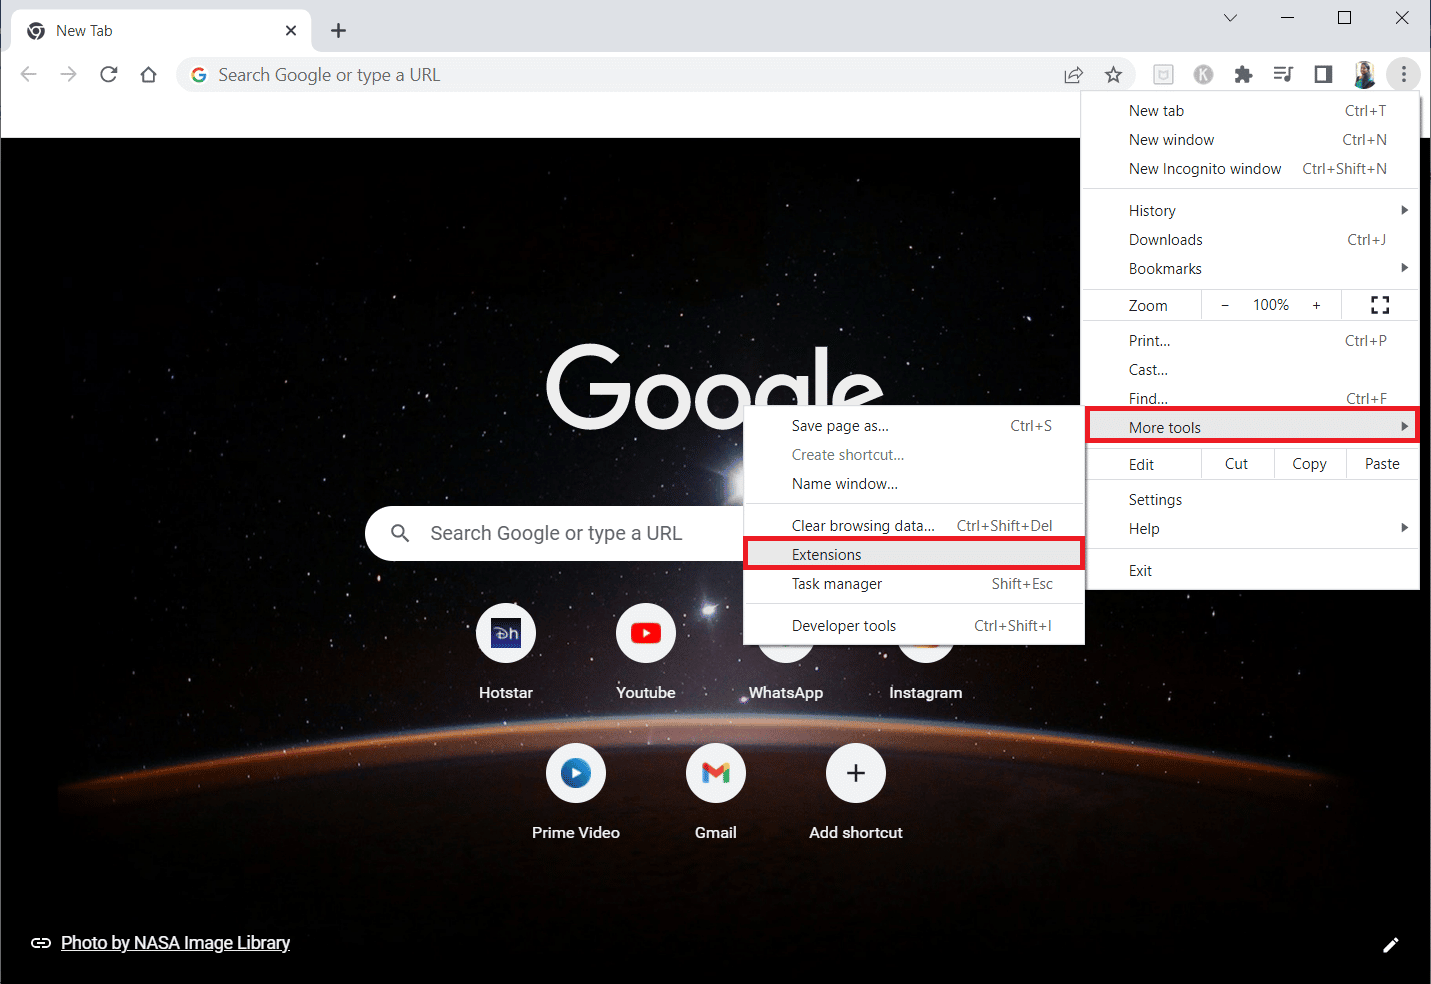 Click on More tools and then select Extensions